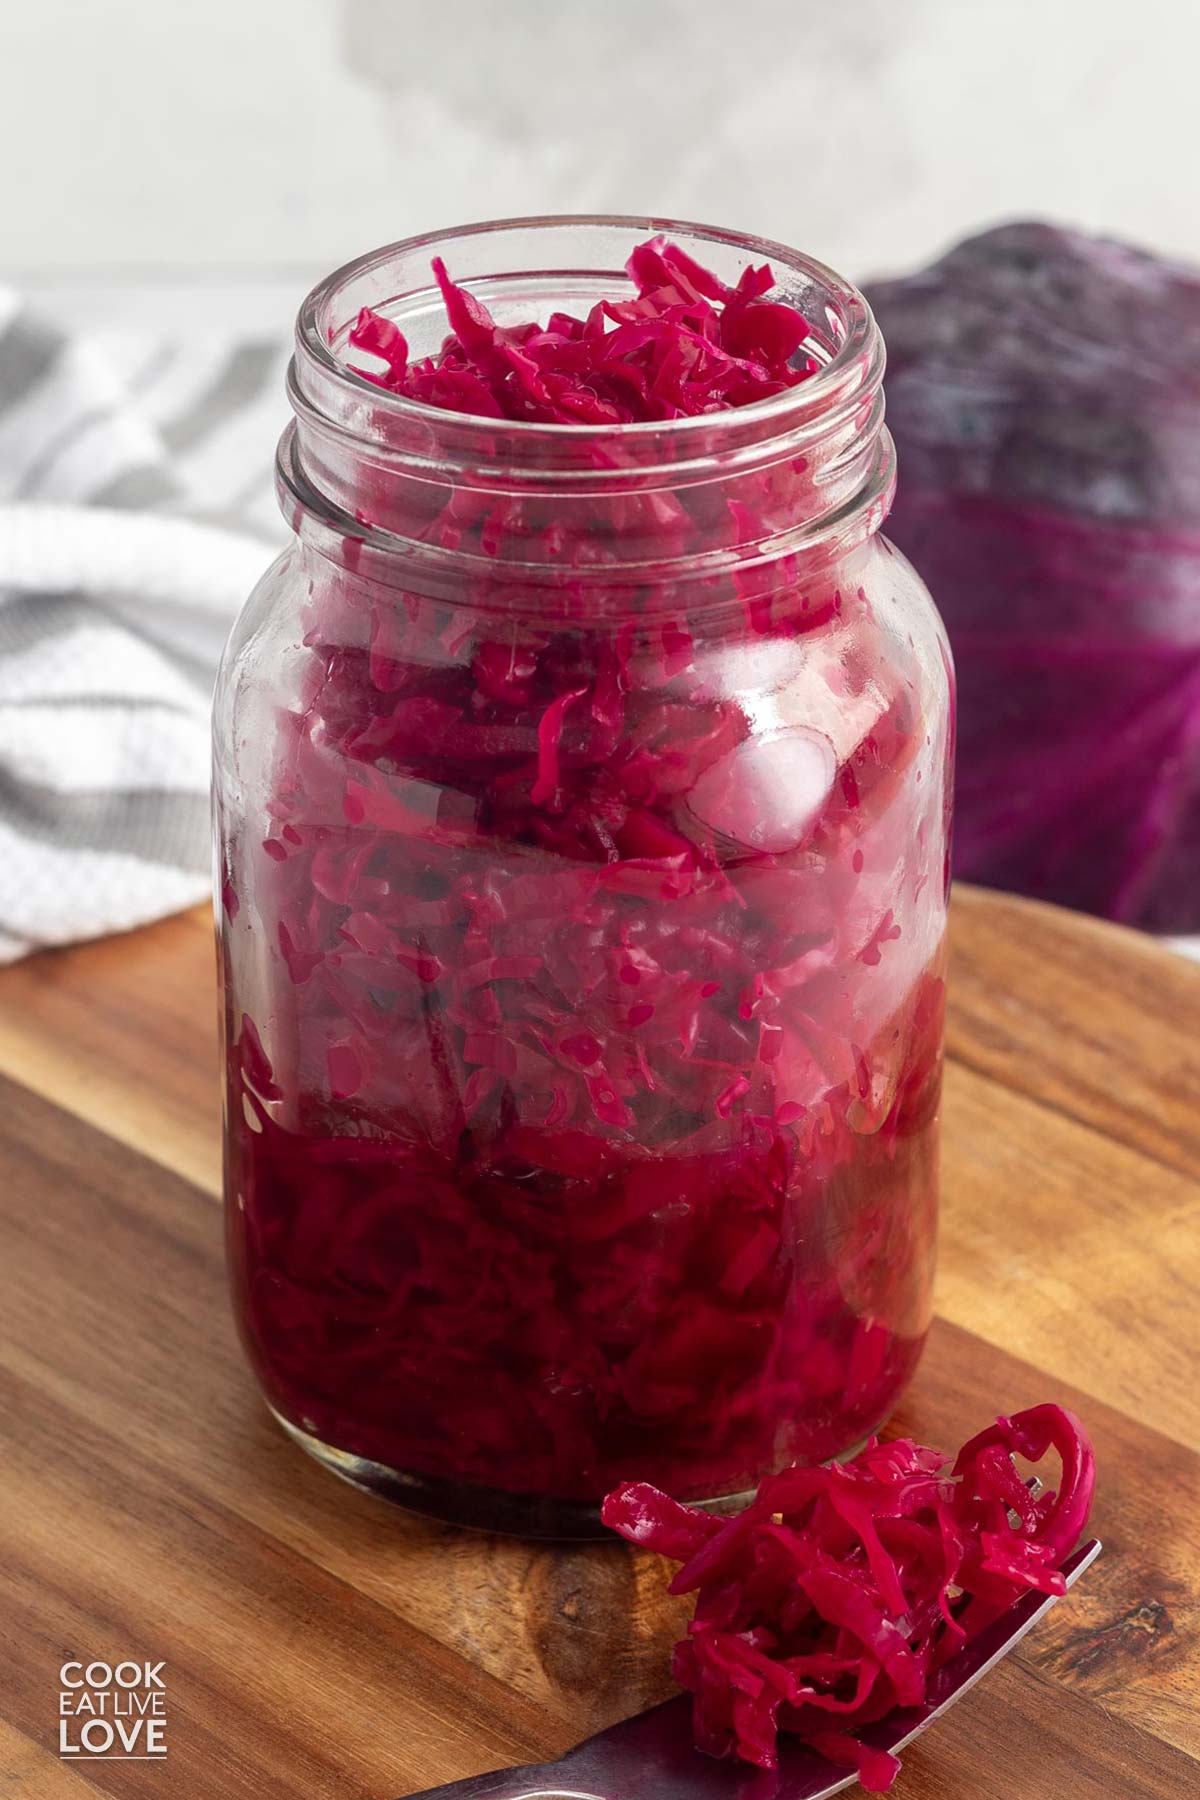 A jar of red sauerkraut on the table with a forkful next to the jar.